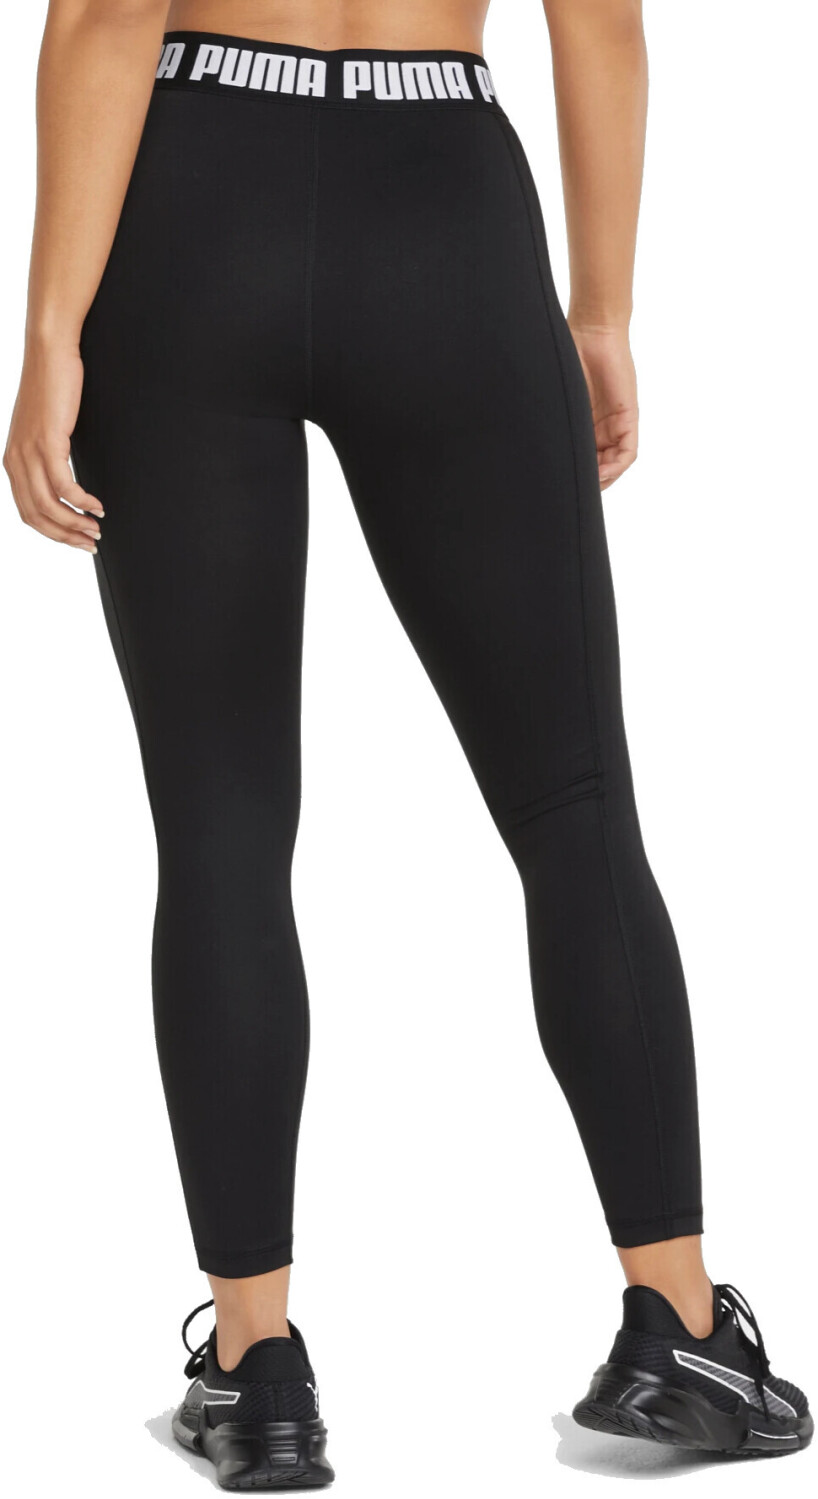 (521601) Waist Best Strong £12.00 Leggings – puma Puma Buy black High (Today) Deals Full from on